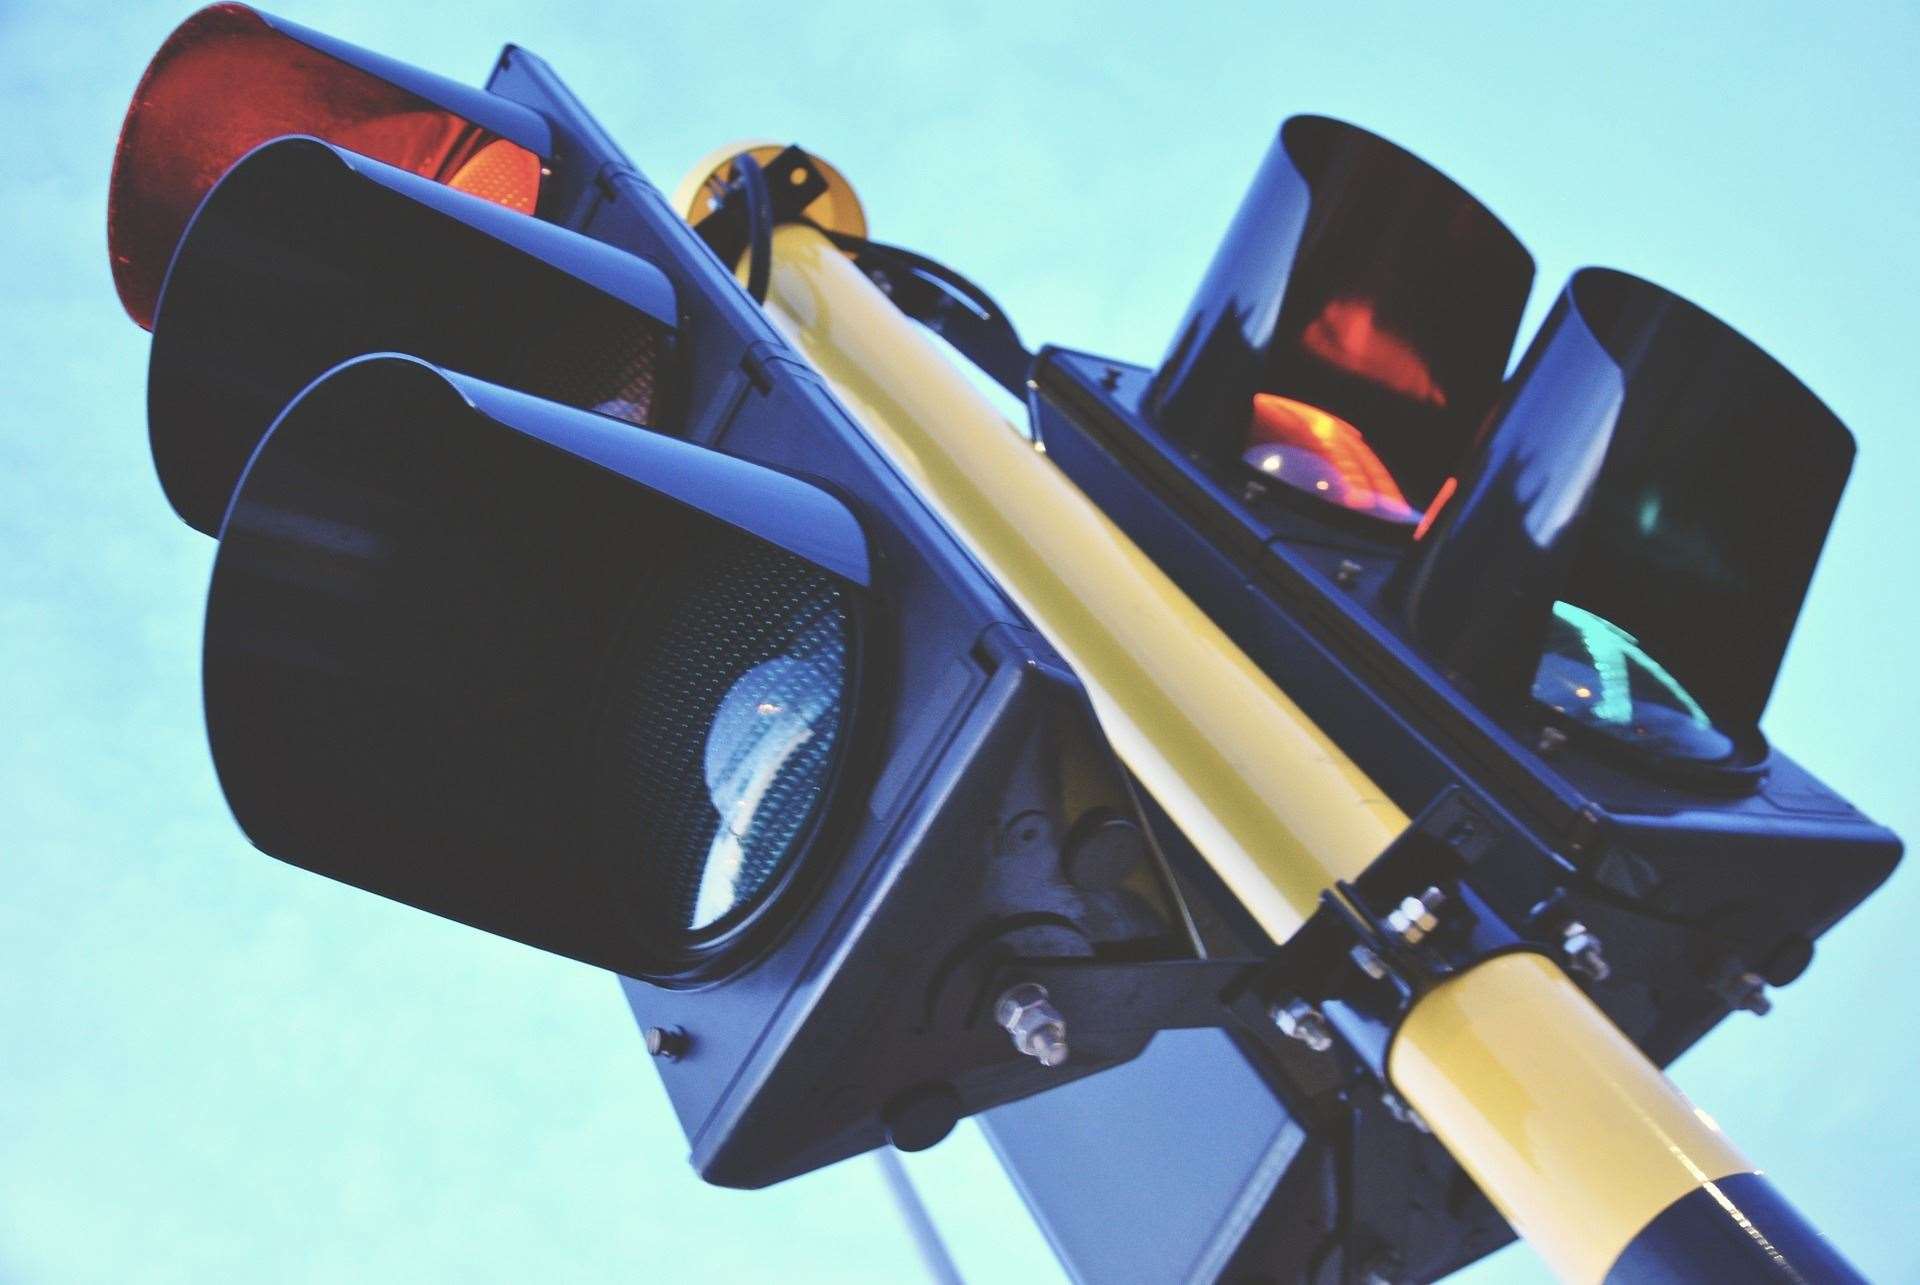 Traffic lights, bus shelters and street lights could all have phone masts attached to them under government plans. Photo: iStock.